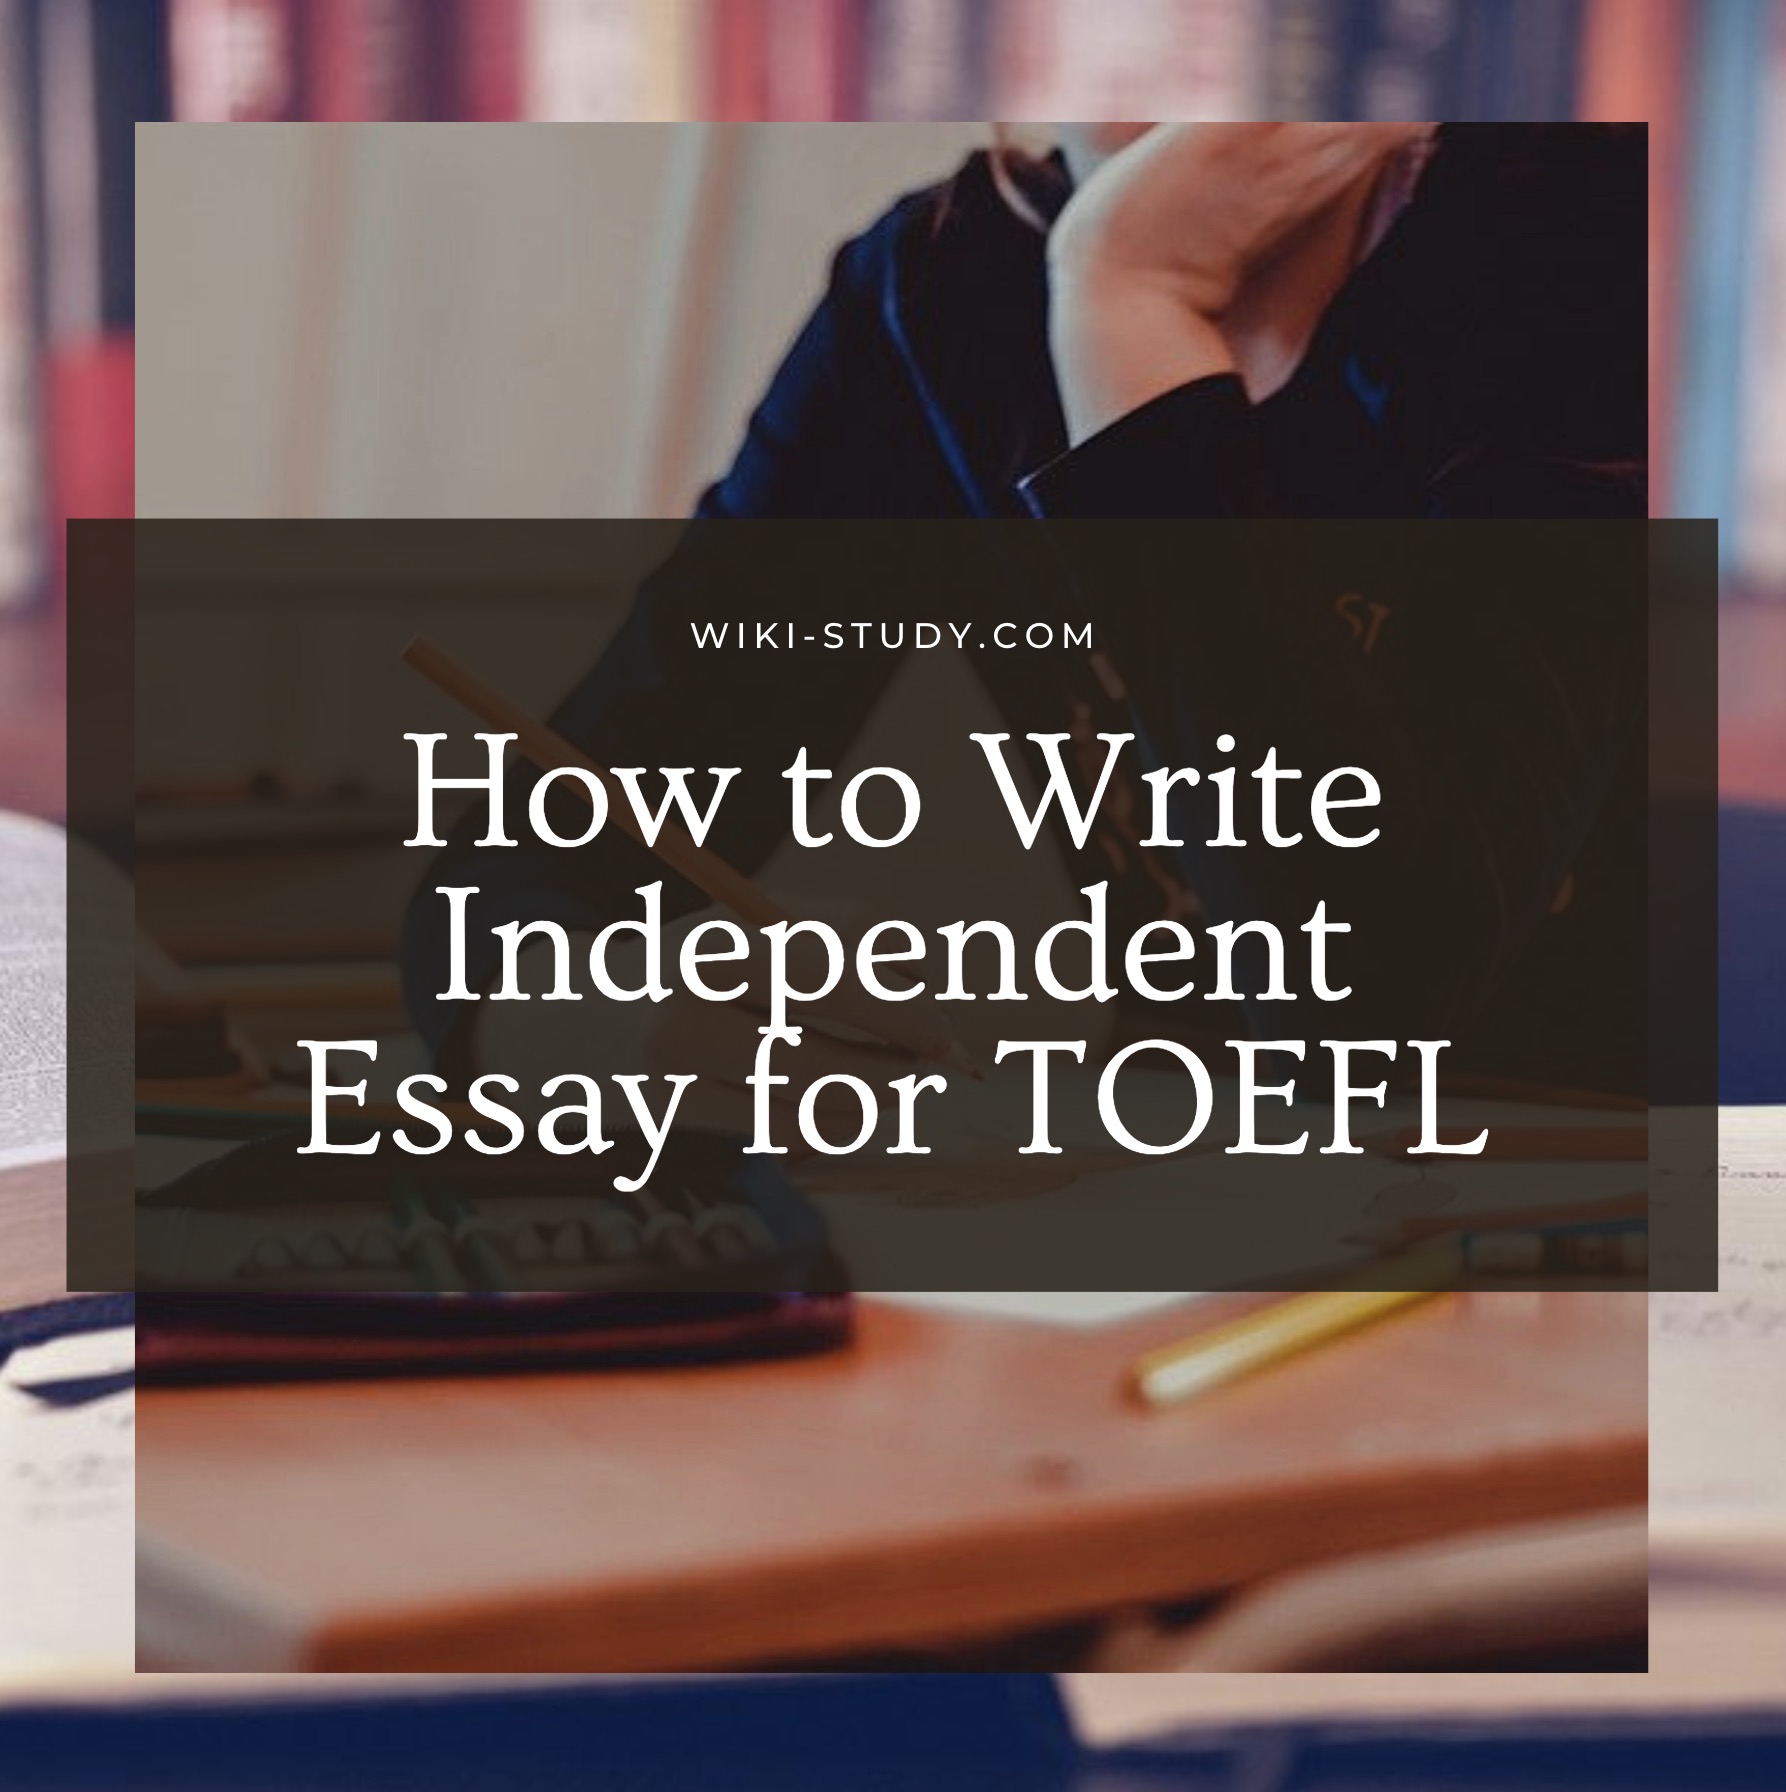 How to Write Independent Essay for TOEFL